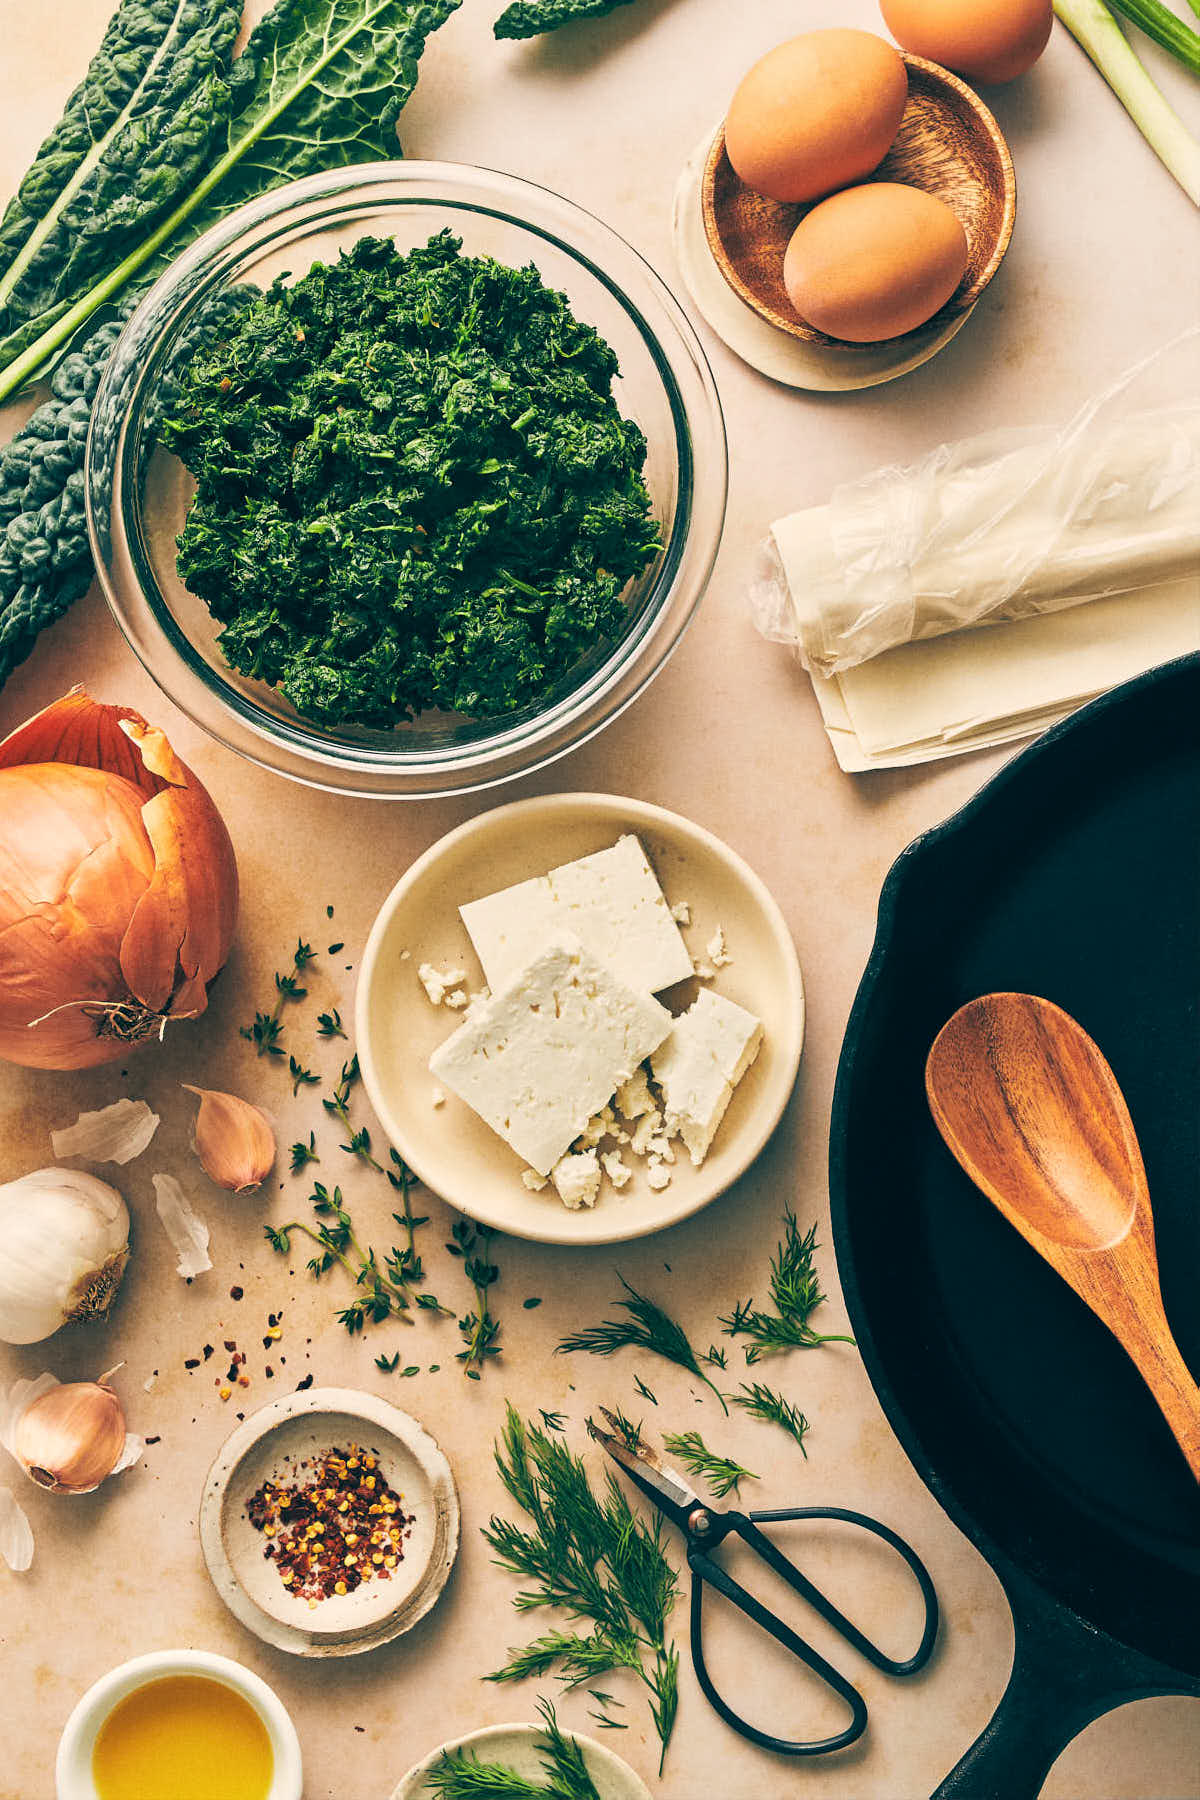 Spanakopita ingredients like spinach, feta, dill, garlic and eggs laid out on the counter with a cast iron pan